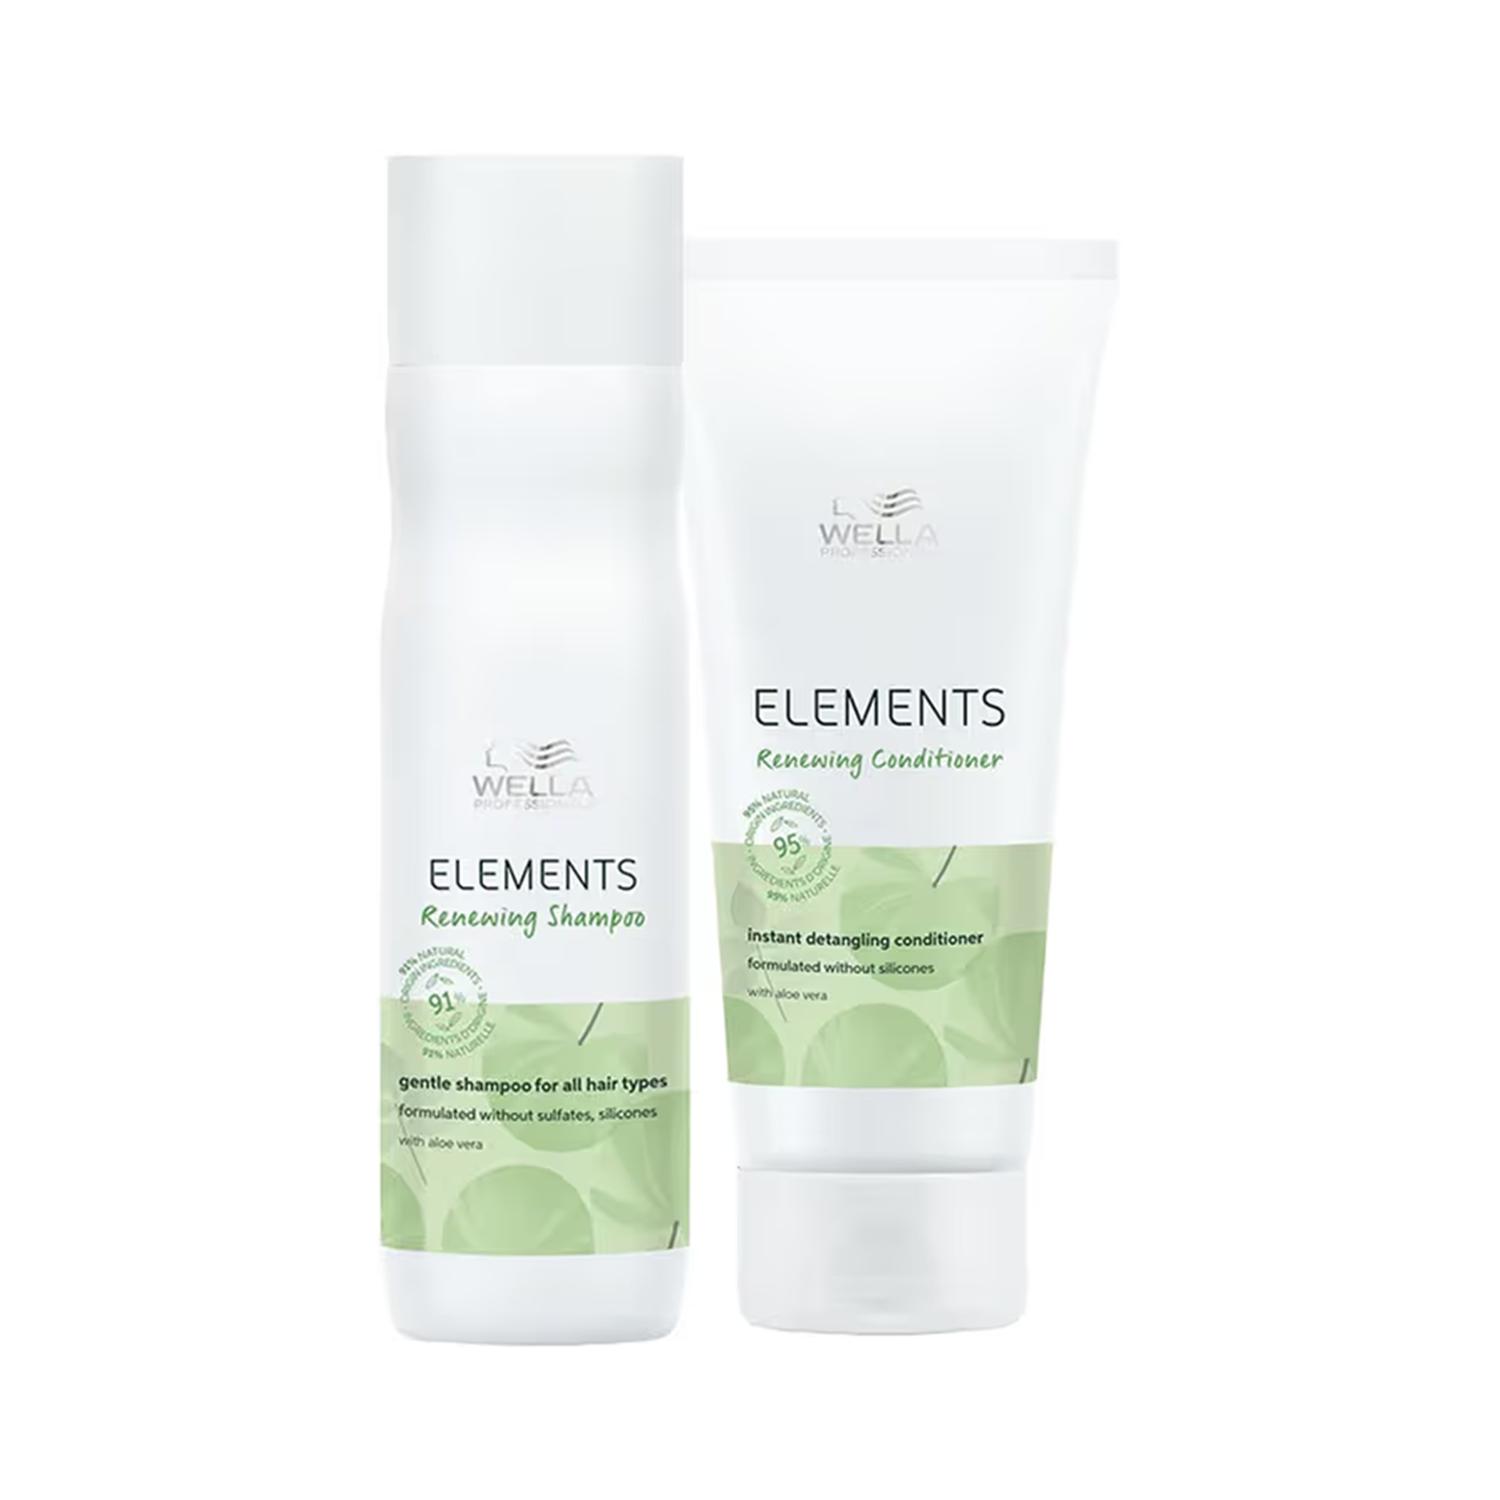 Wella Professionals | Wella Professionals Elements Sulfate free Renewing Shampoo 250 ml & Conditioner 200 ml for all hair